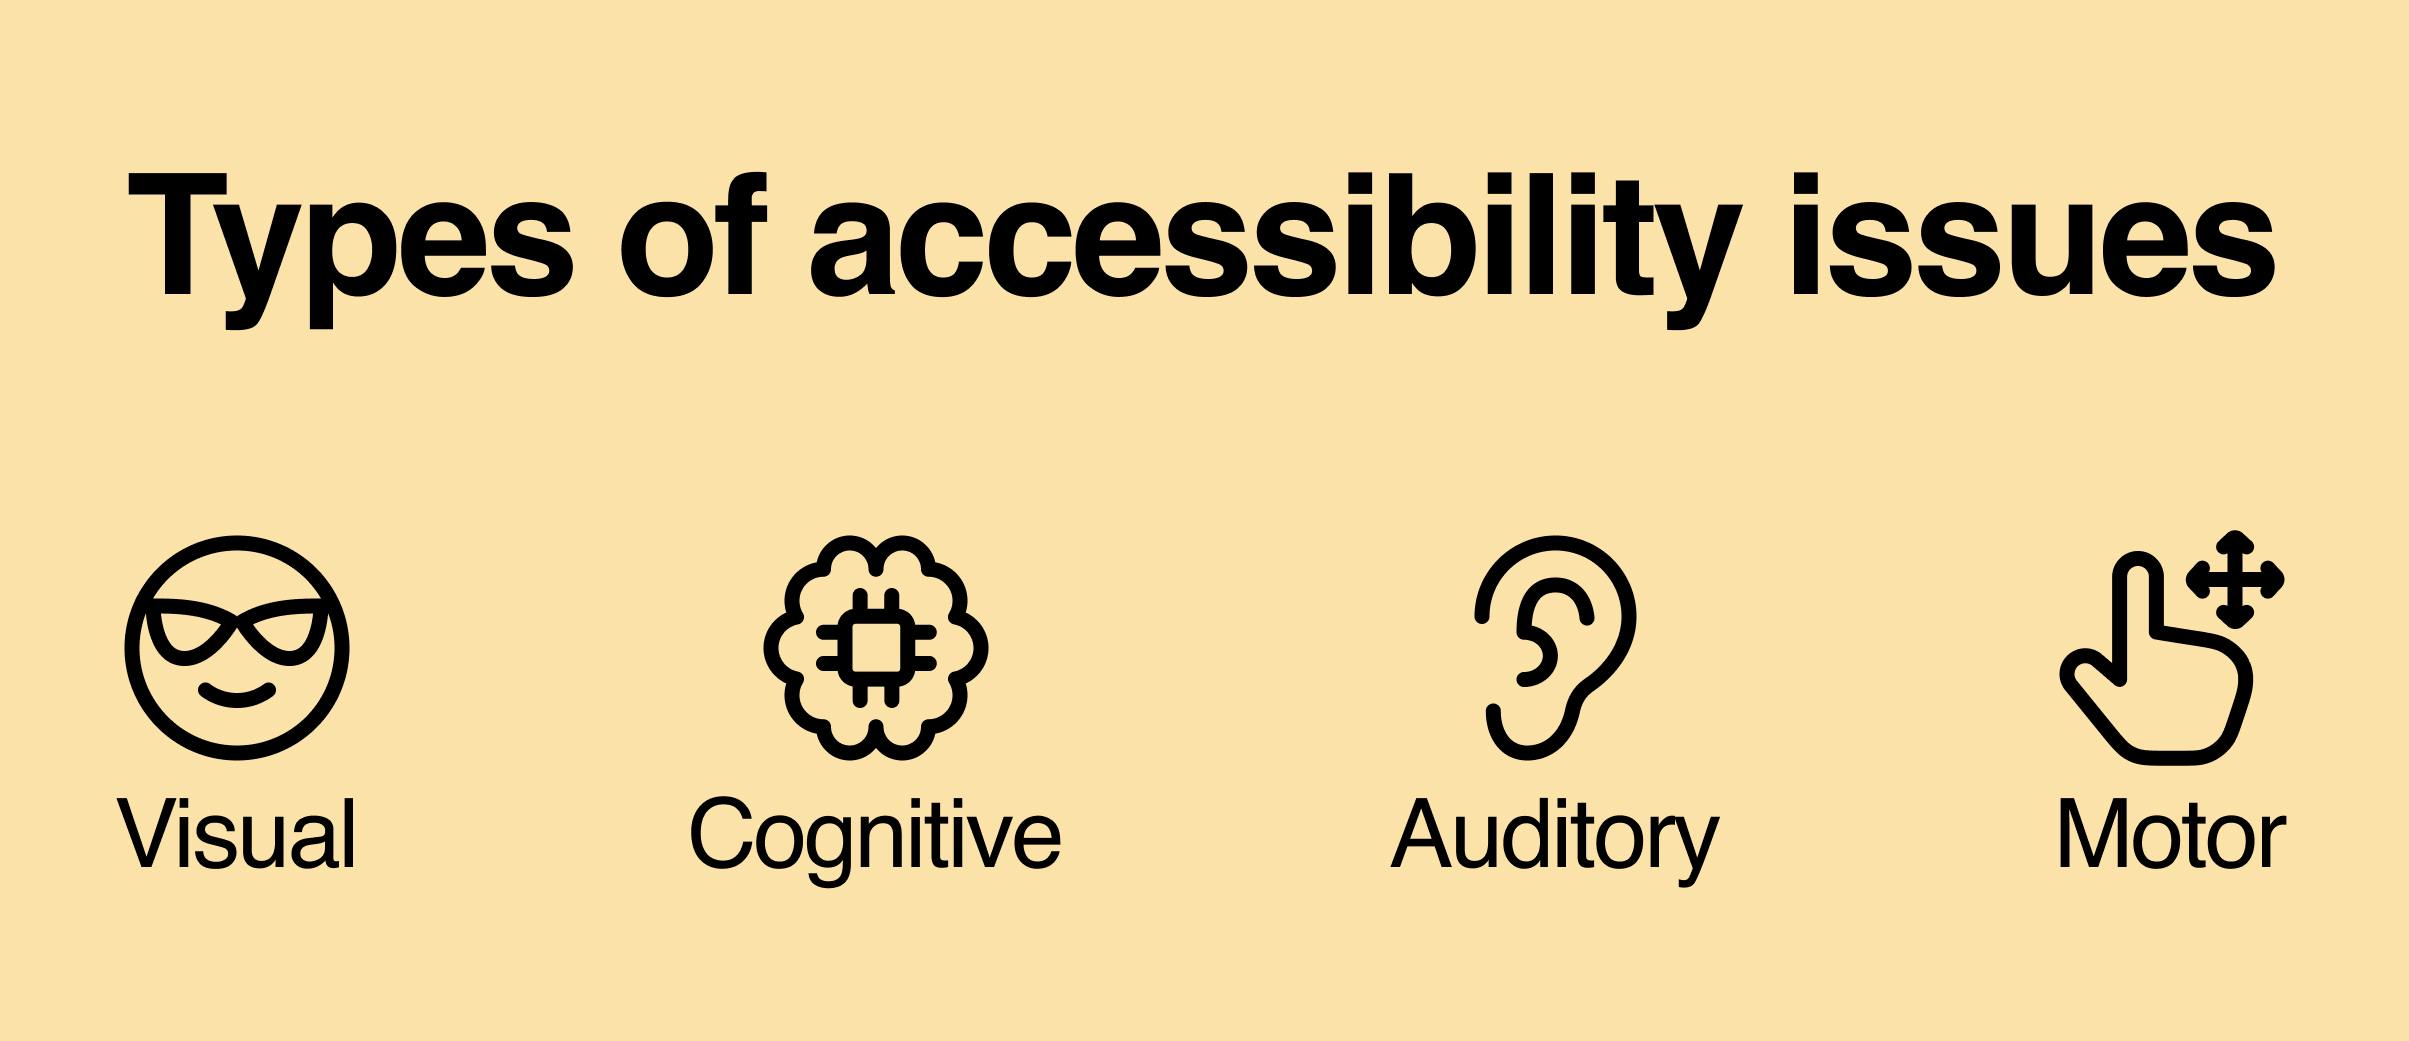 A card showing the types of accessibility issues